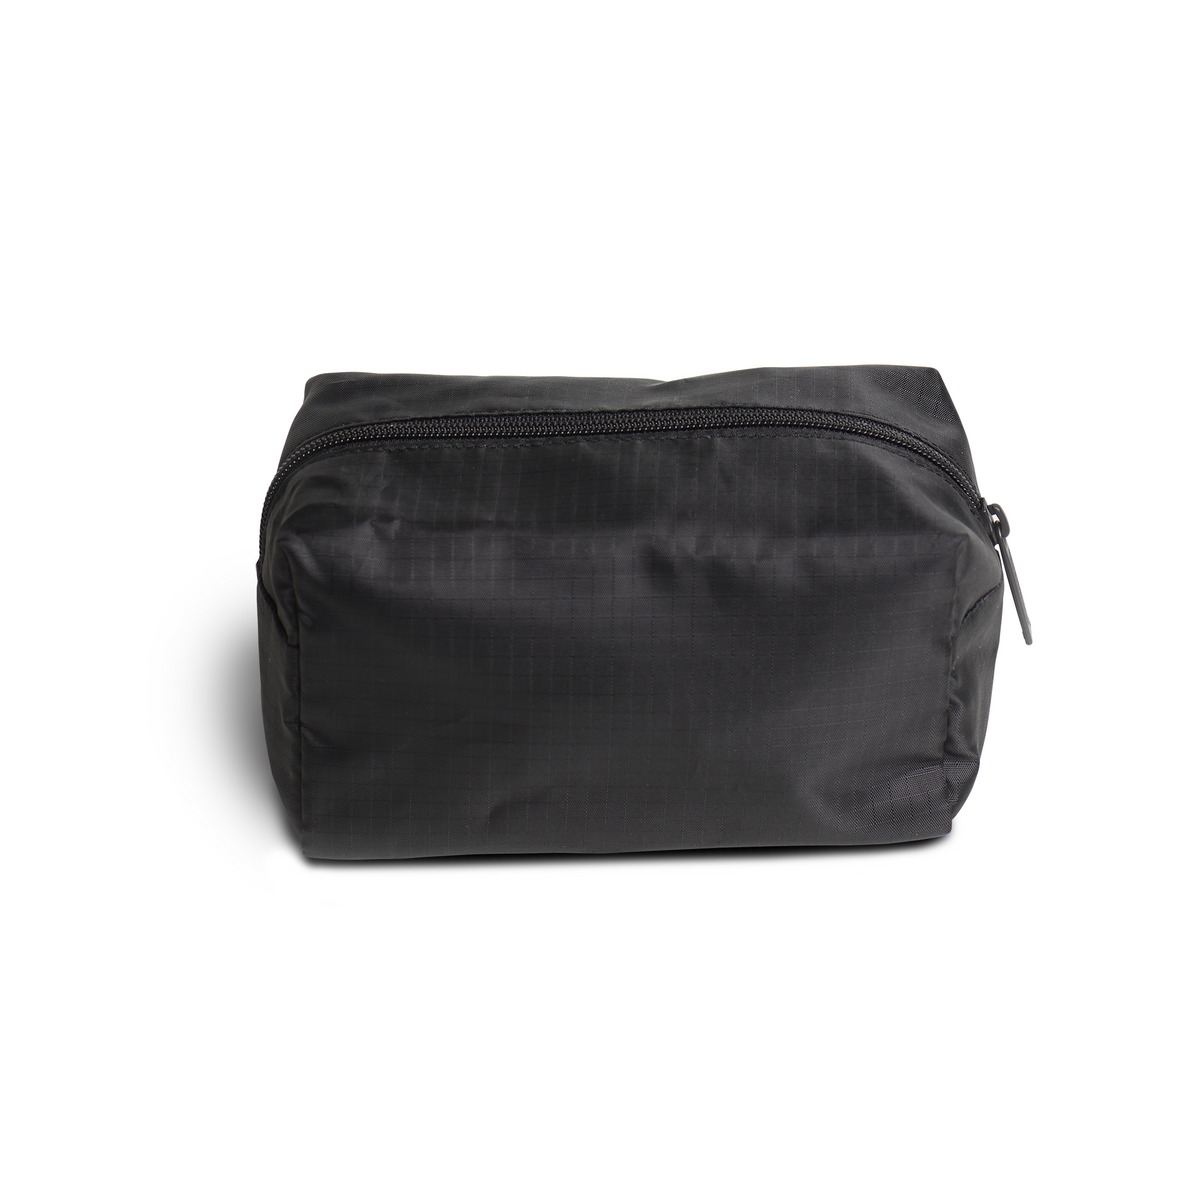 Front view, full zippered travel pouch, closed, in black.